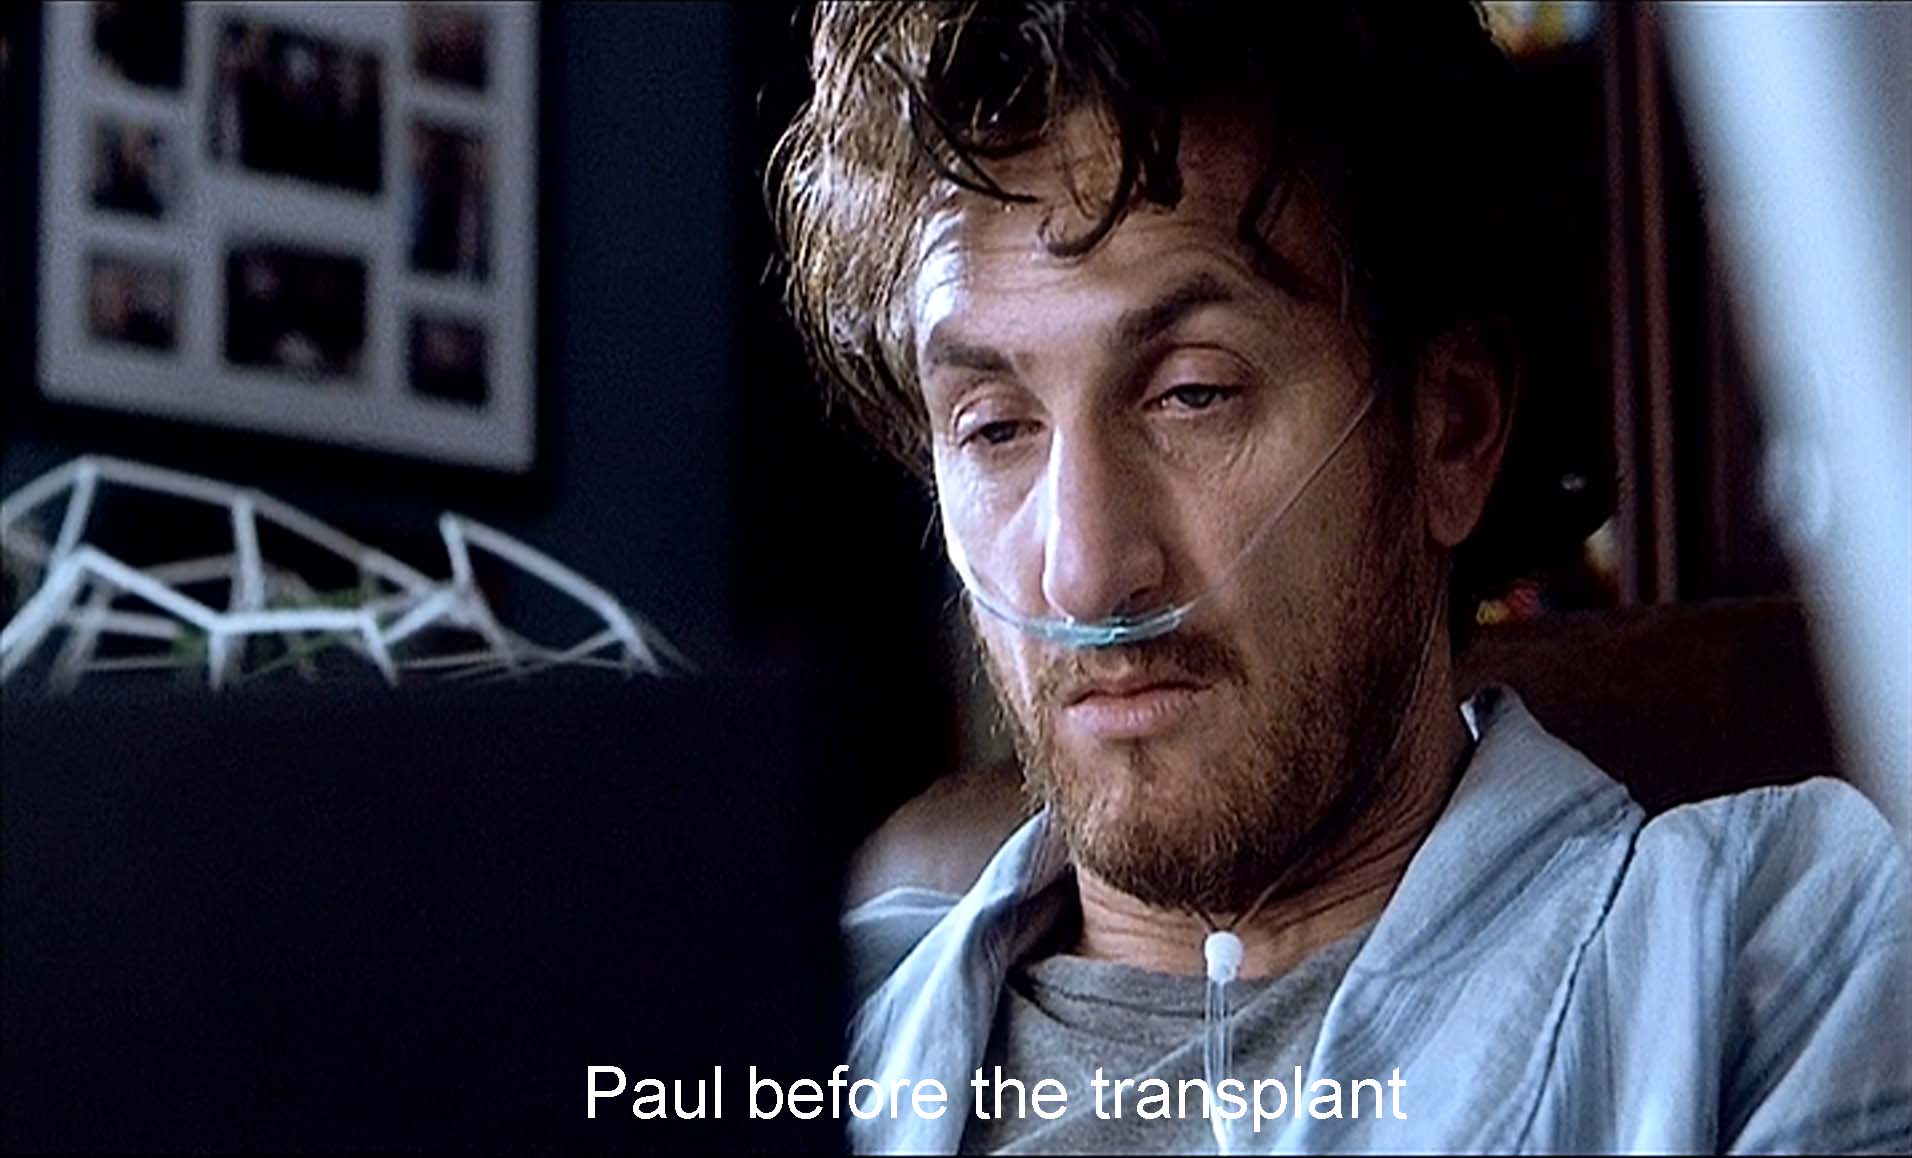 Paul before the transplant